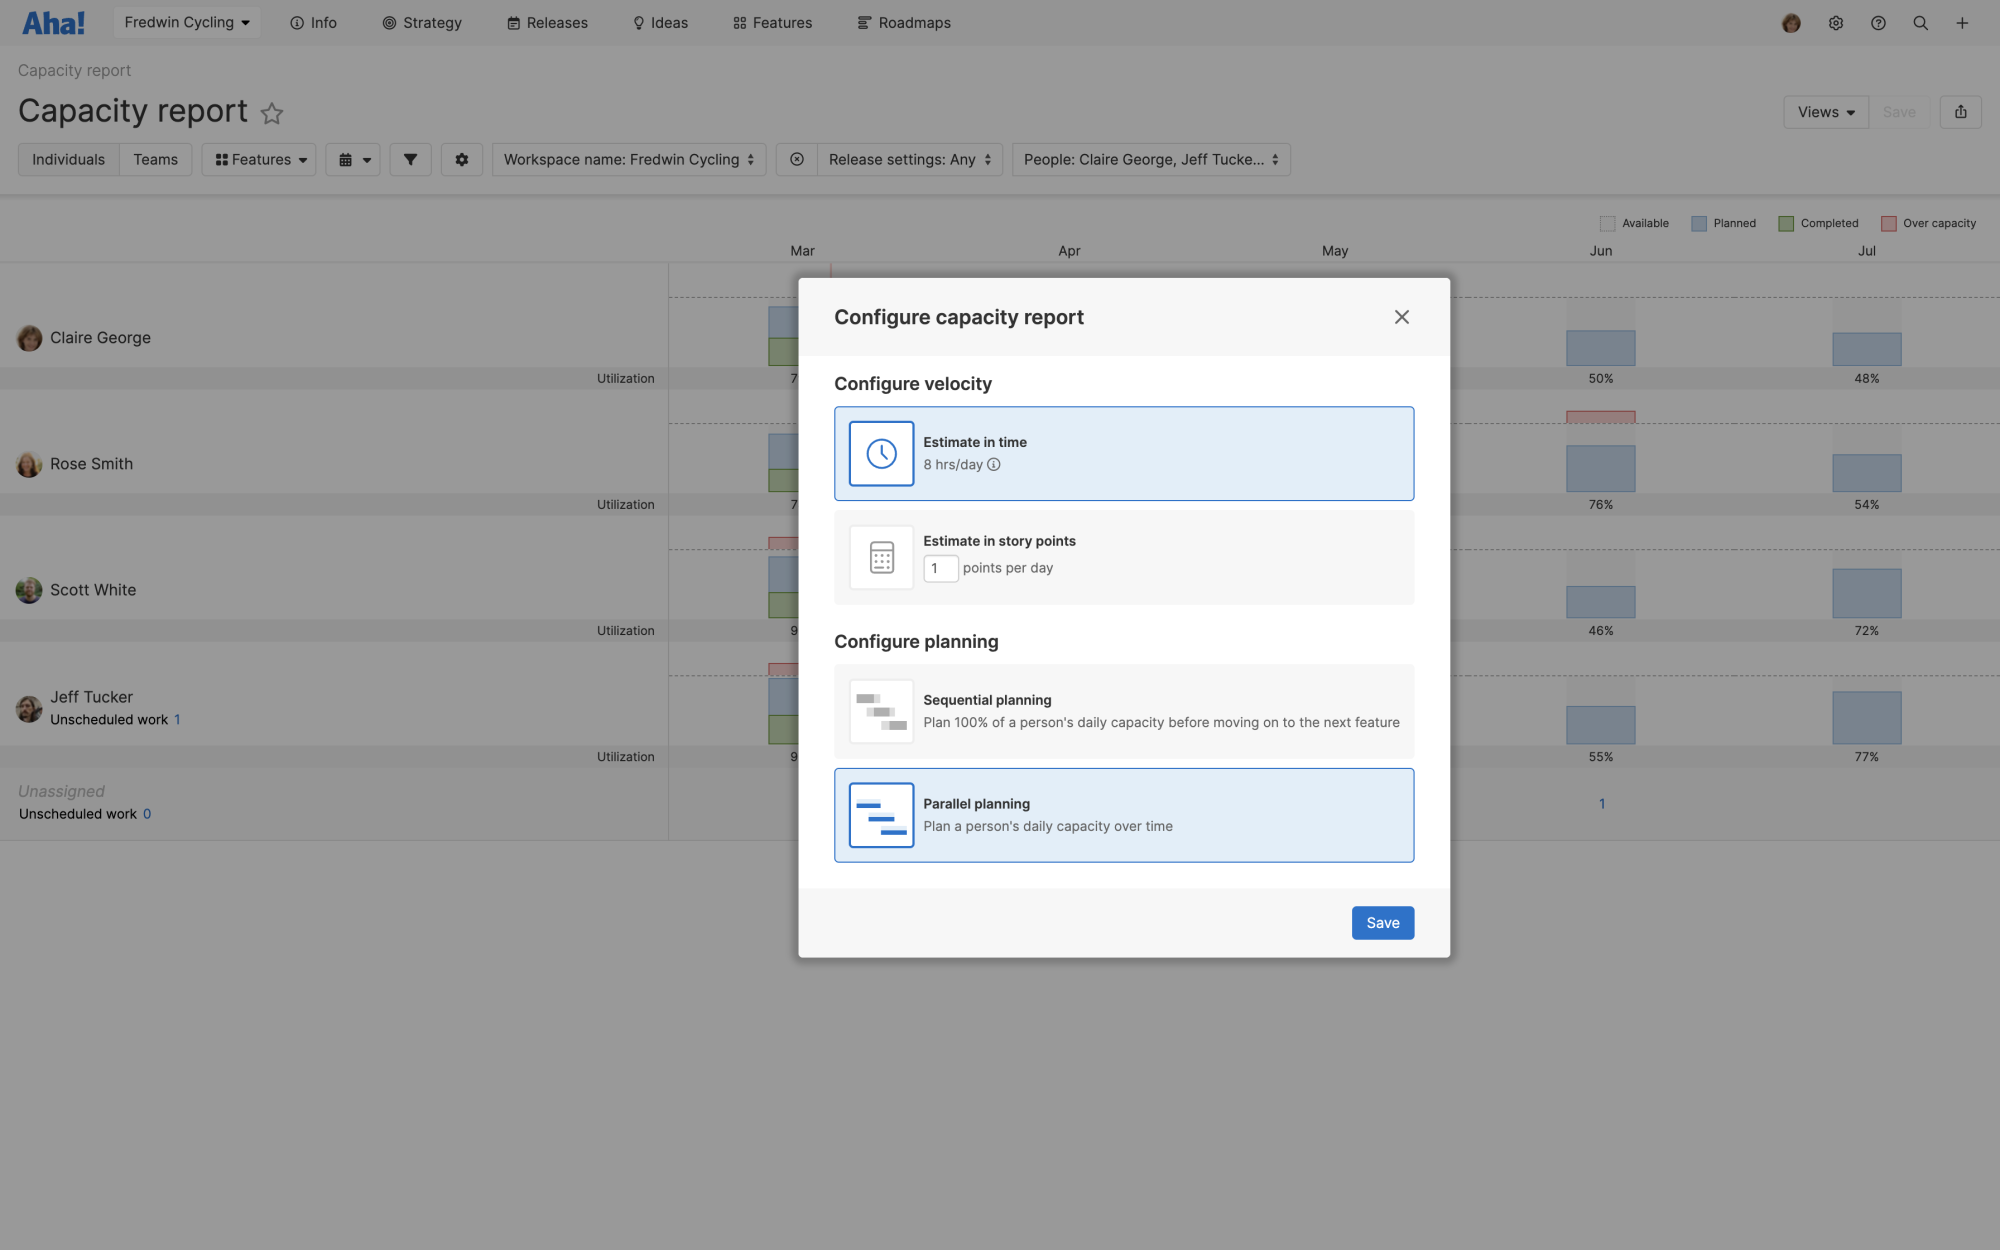 If you are planning capacity across teams, navigate to the Edit capacity report settings to select the plan in parallel option.